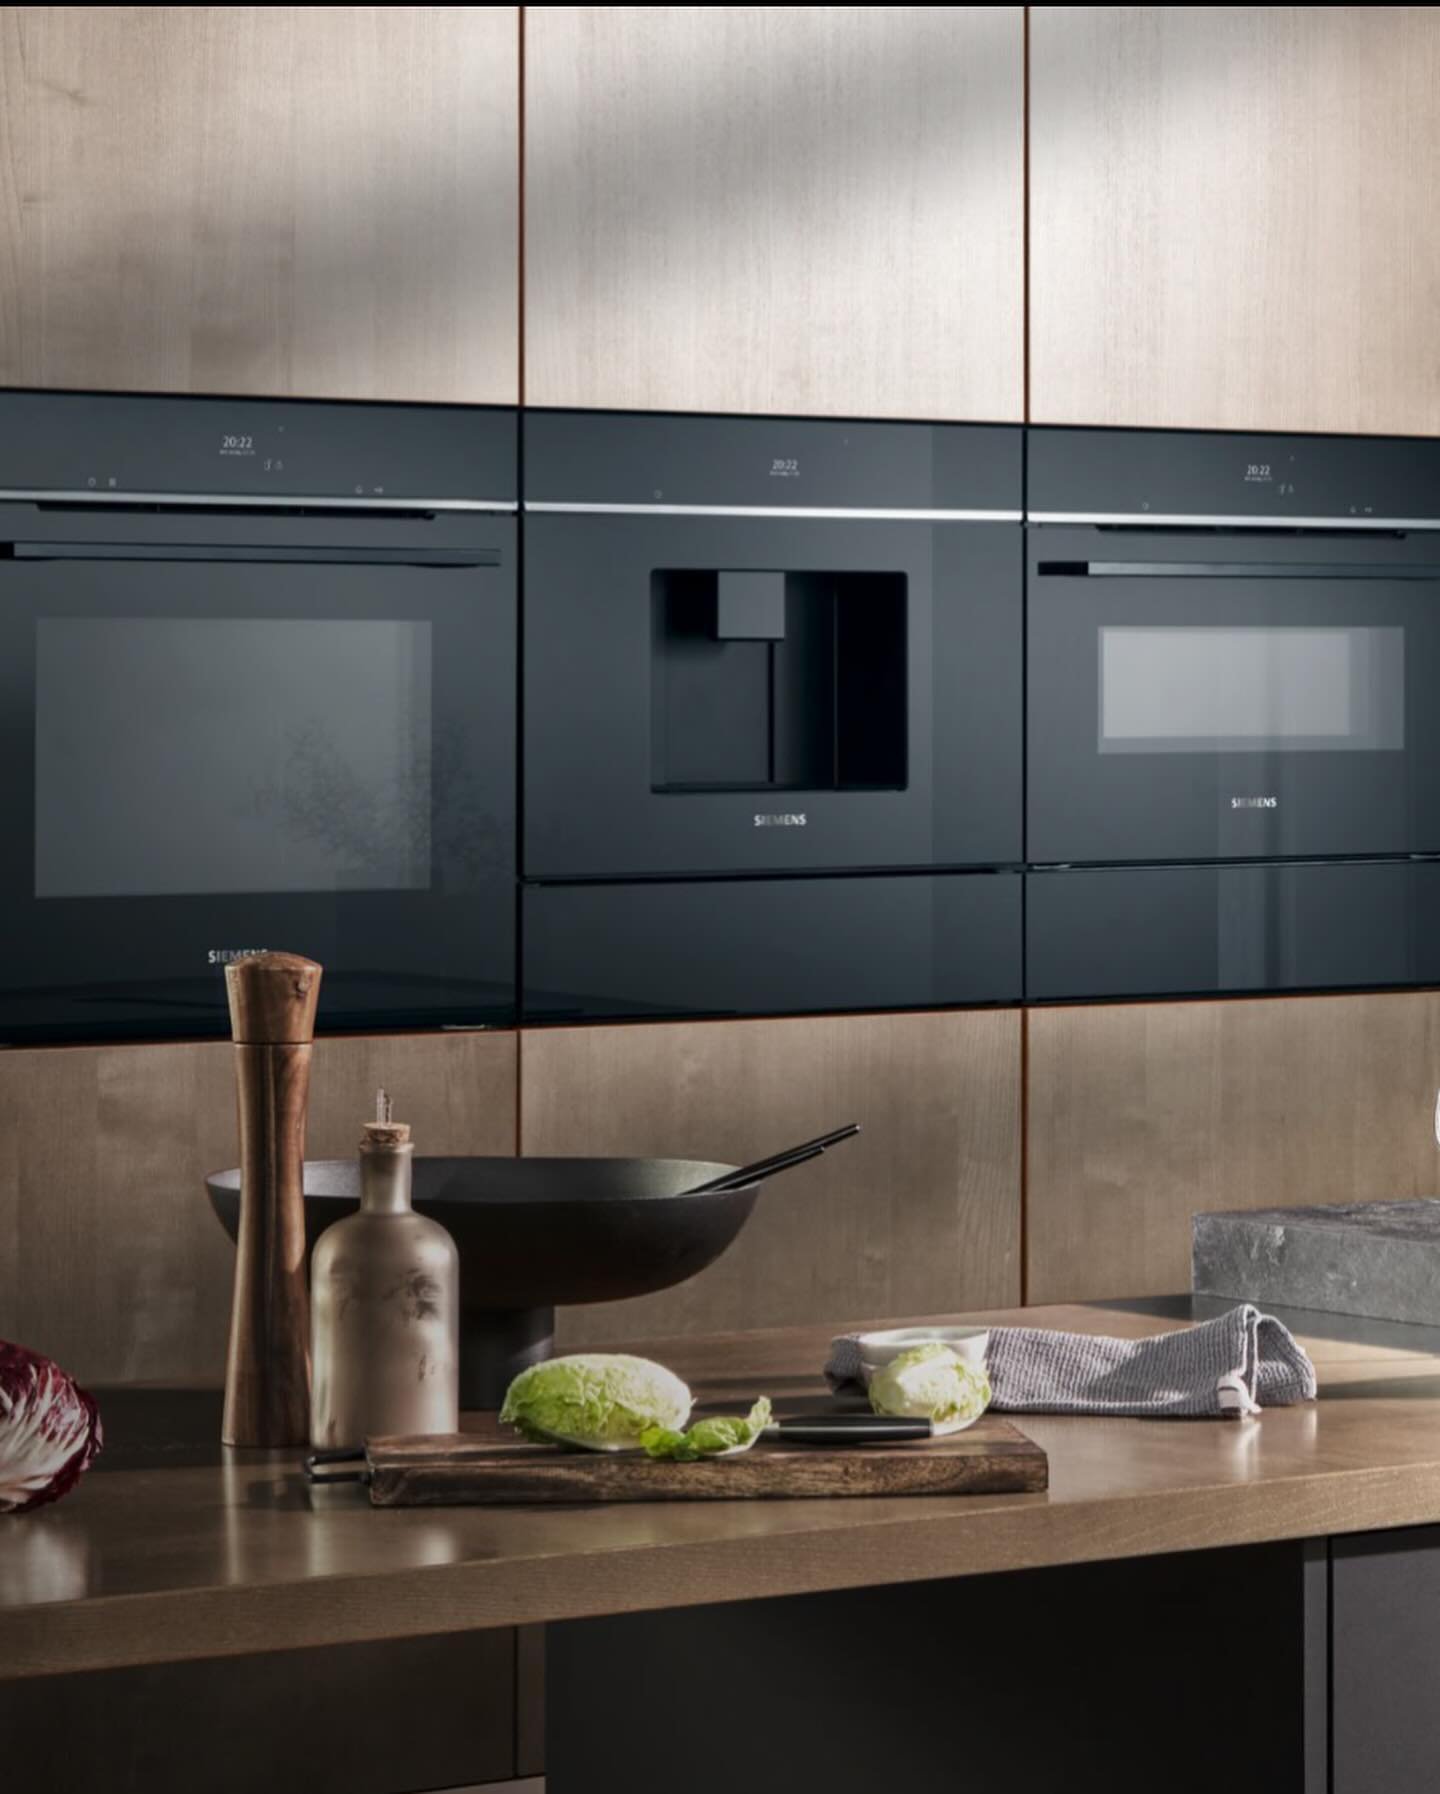 Ready to meet new kitchen technology designed to make your life easier?
 
Head to Hart &amp; Co. and cook like a pro with the Siemens iQ700 Oven Range, which includes innovative features that simplify cooking while providing foolproof results.
 
Gone